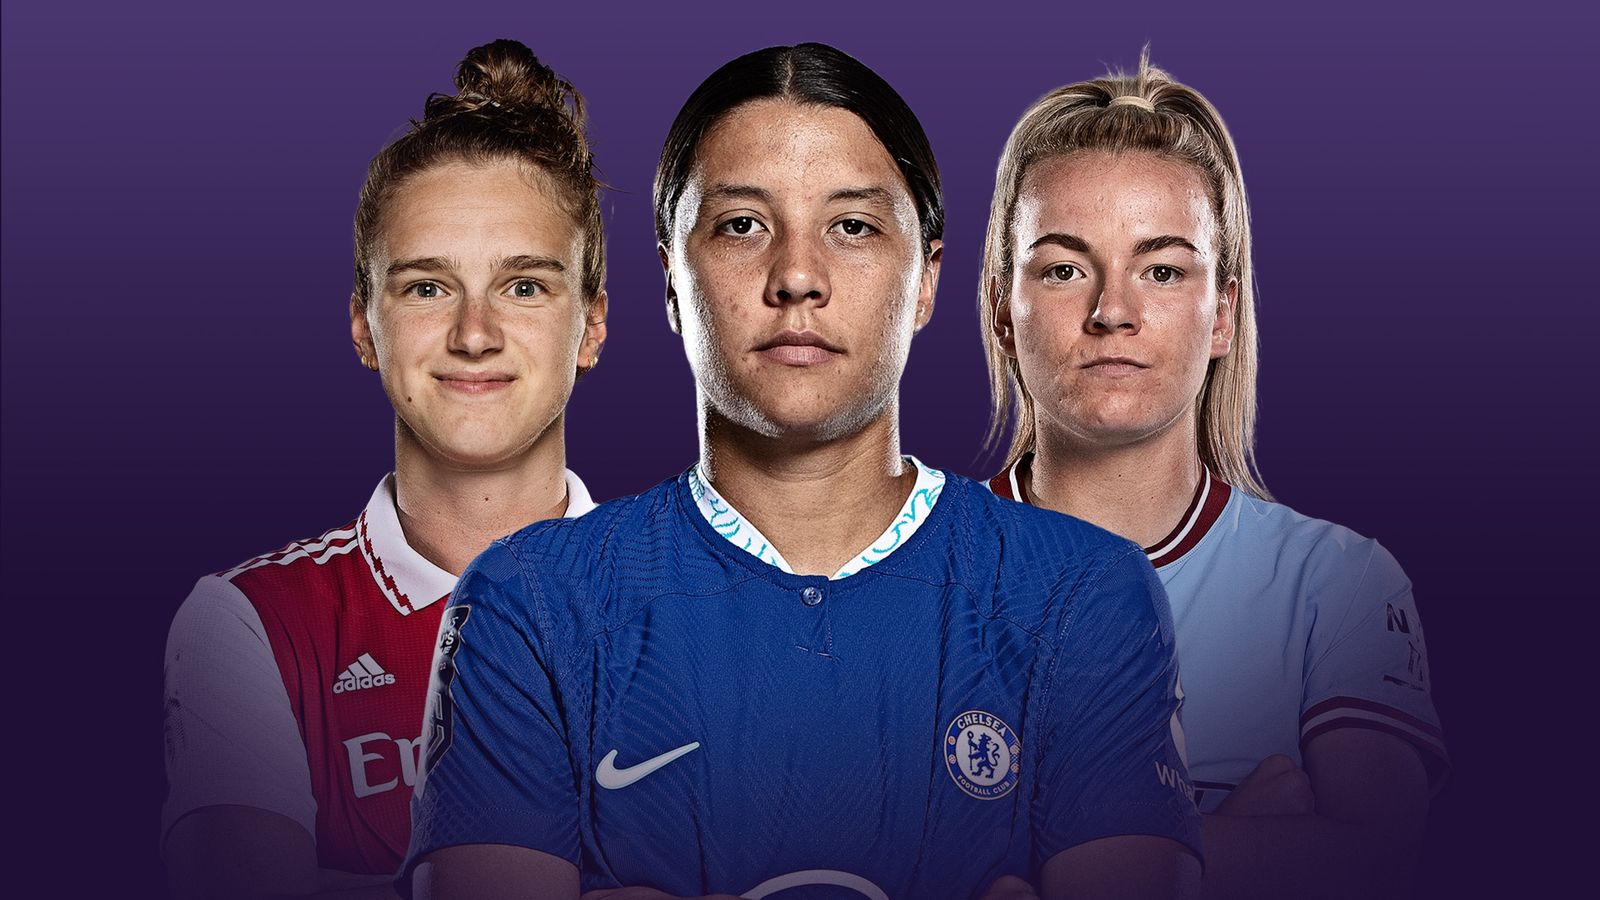 Chelsea Women head coach Emma Hayes excited for ‘blockbuster’ WSL weekend | Football News